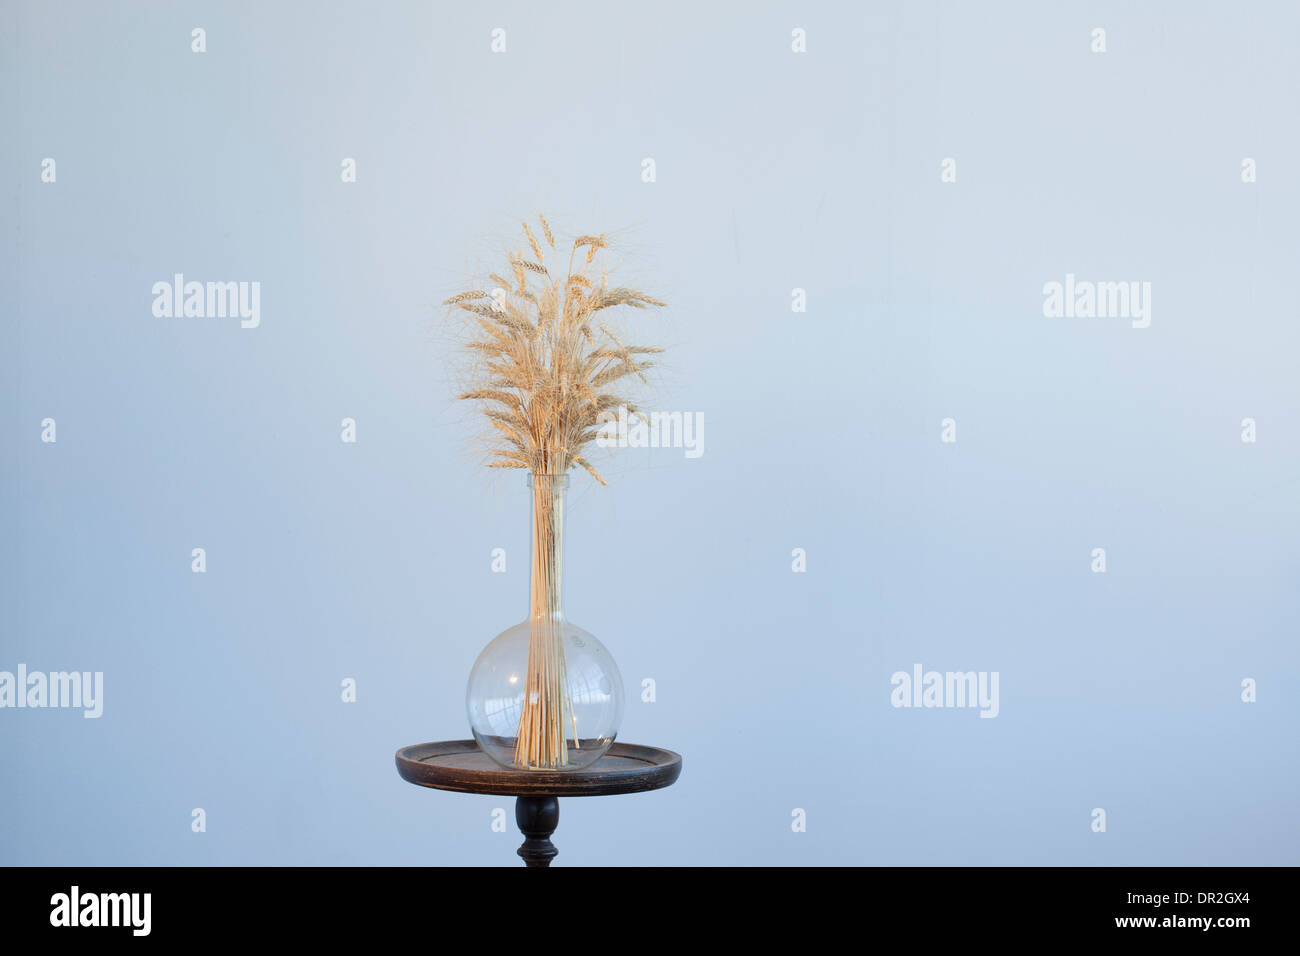 dry wheat in a glass flask on a wooden stand Stock Photo